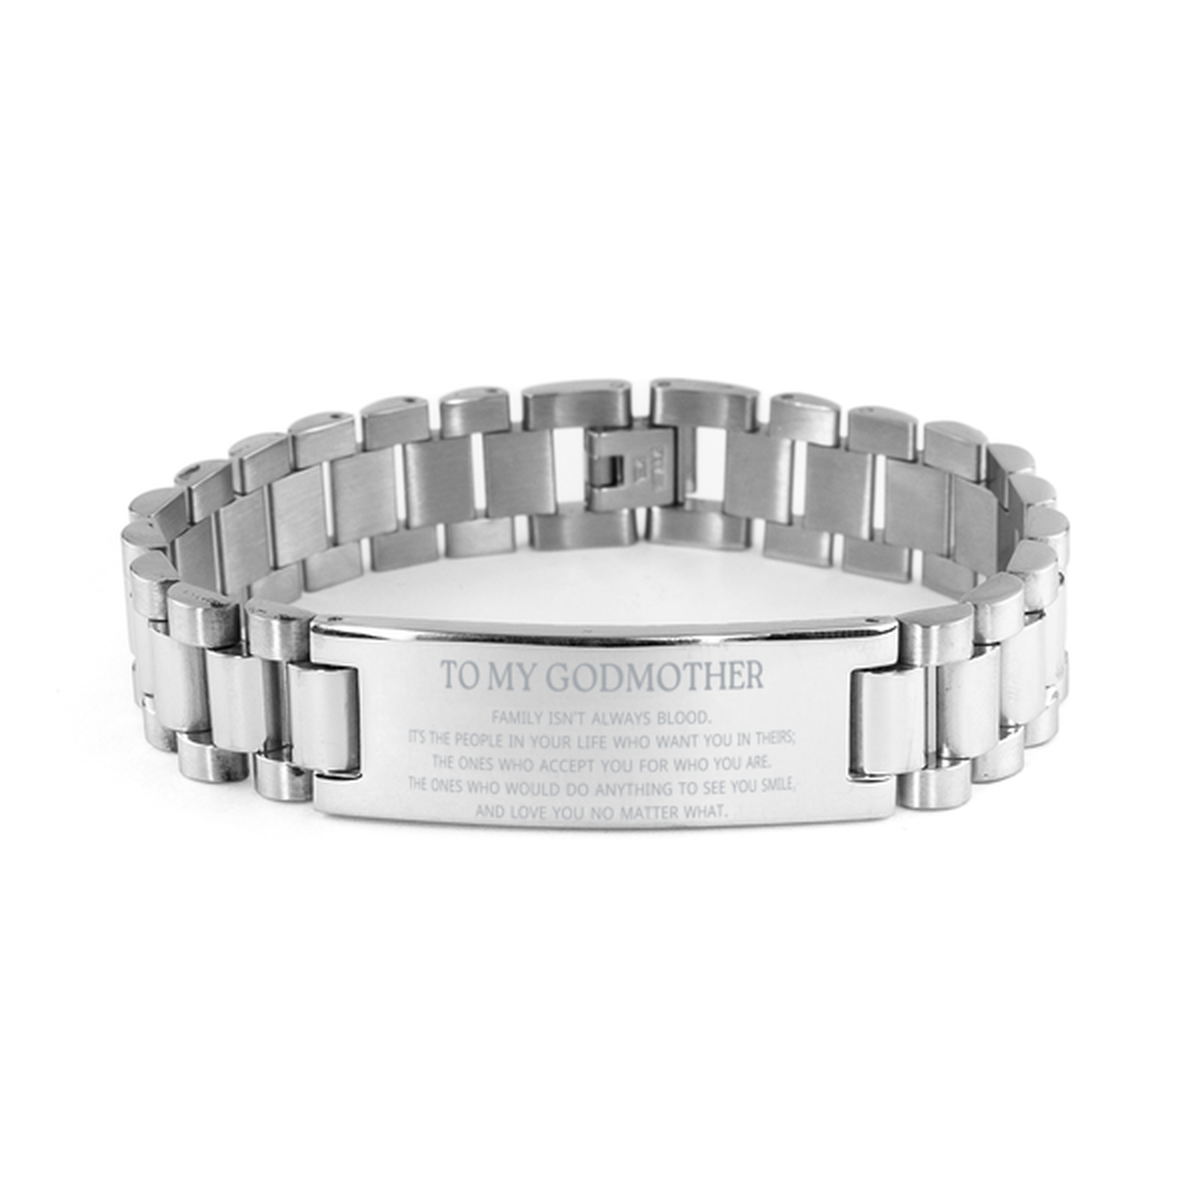 To My Godmother Gifts, Family isn't always blood, Godmother Ladder Stainless Steel Bracelet, Birthday Christmas Unique Present For Godmother